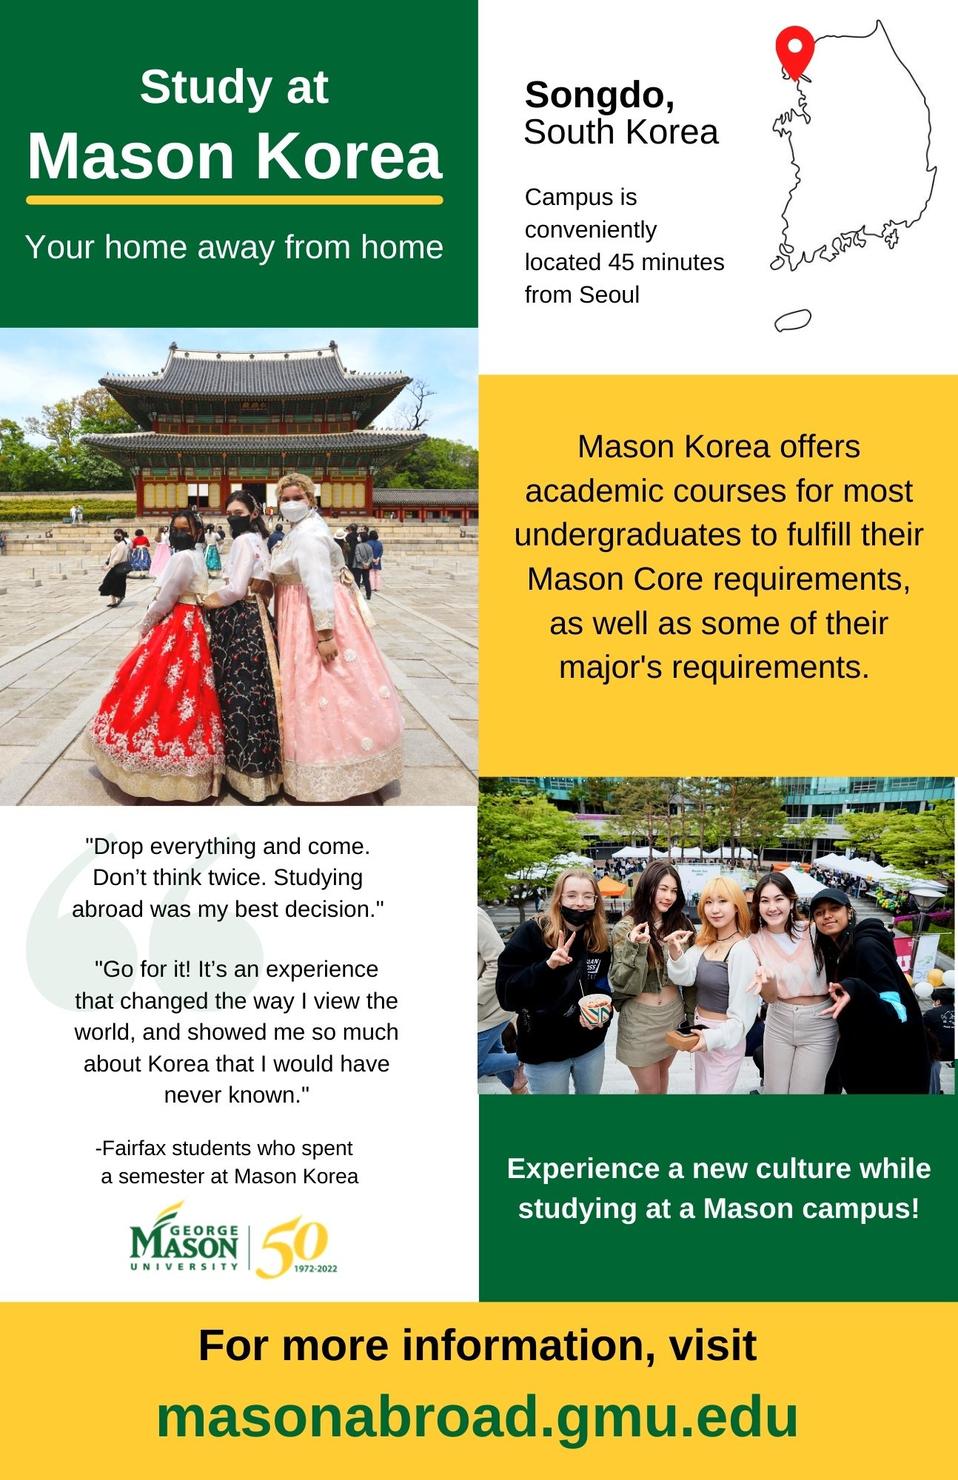 Study at Mason Korea, your home away from home.  Pictures from South Korea with map showing campus location in Songdo, conveniently located 45 minutes from Seoul. Experience a new culture while studying on a Mason Campus. Deadline to apply for Spring 2023 is October 10, 2022. For more information visit masonabroad.gmu.edu